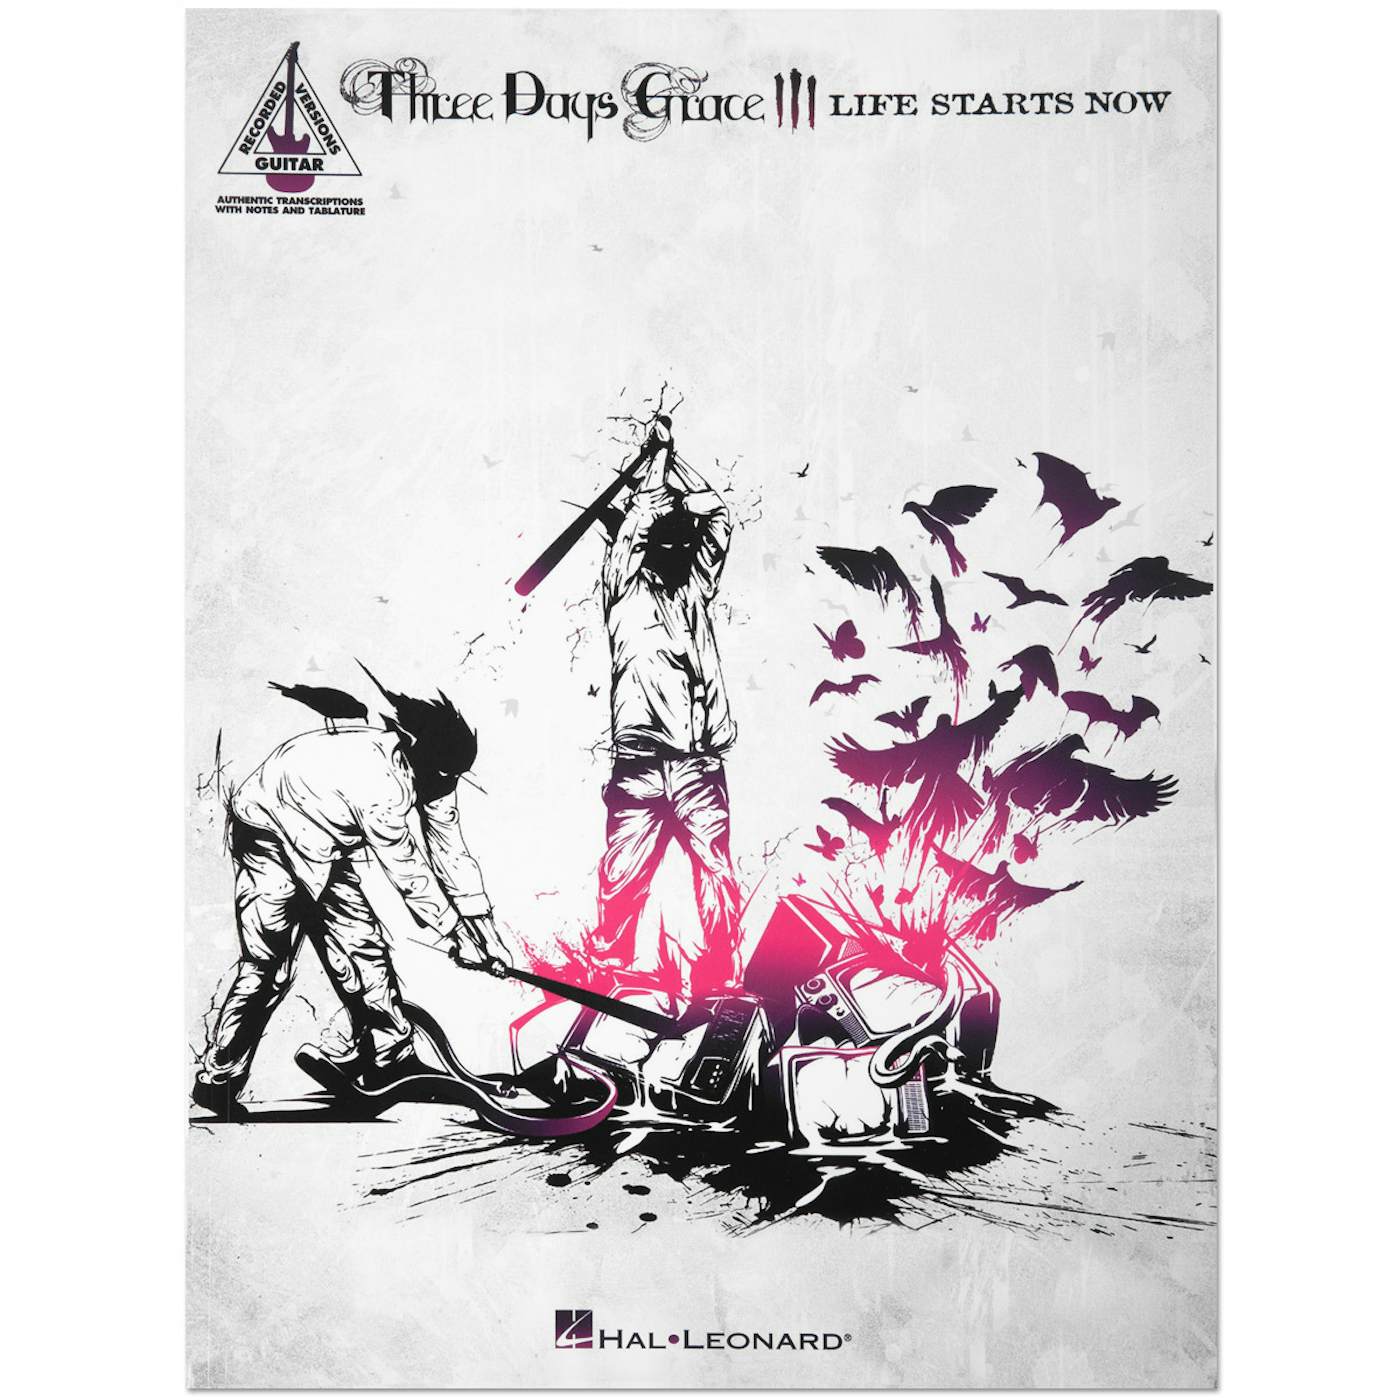 Three Days Grace – Life Starts Now Songbook